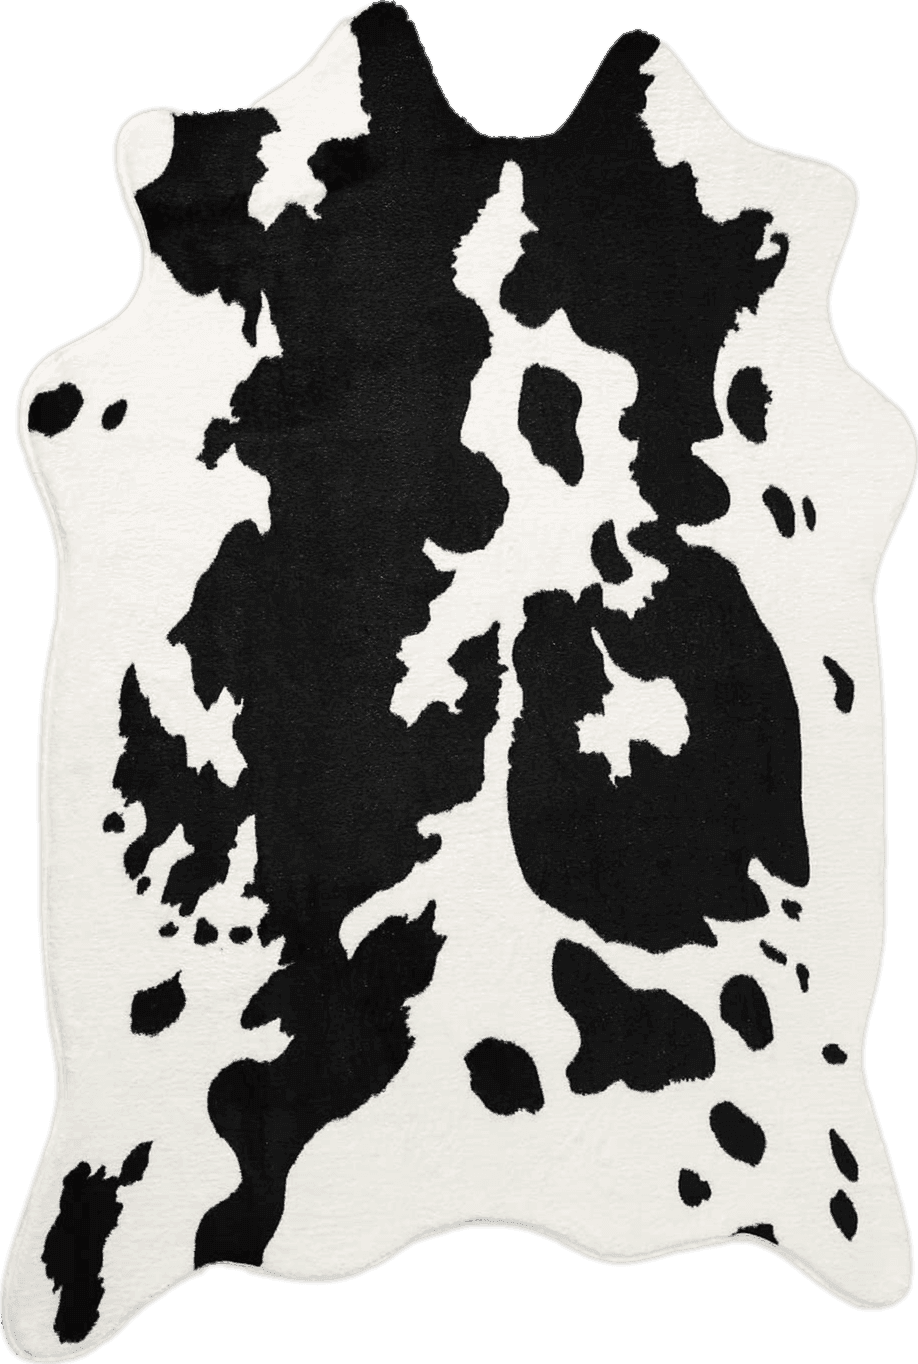 Faux fur Fluffy Cow Print Rug 4.6ft x 5.2ft